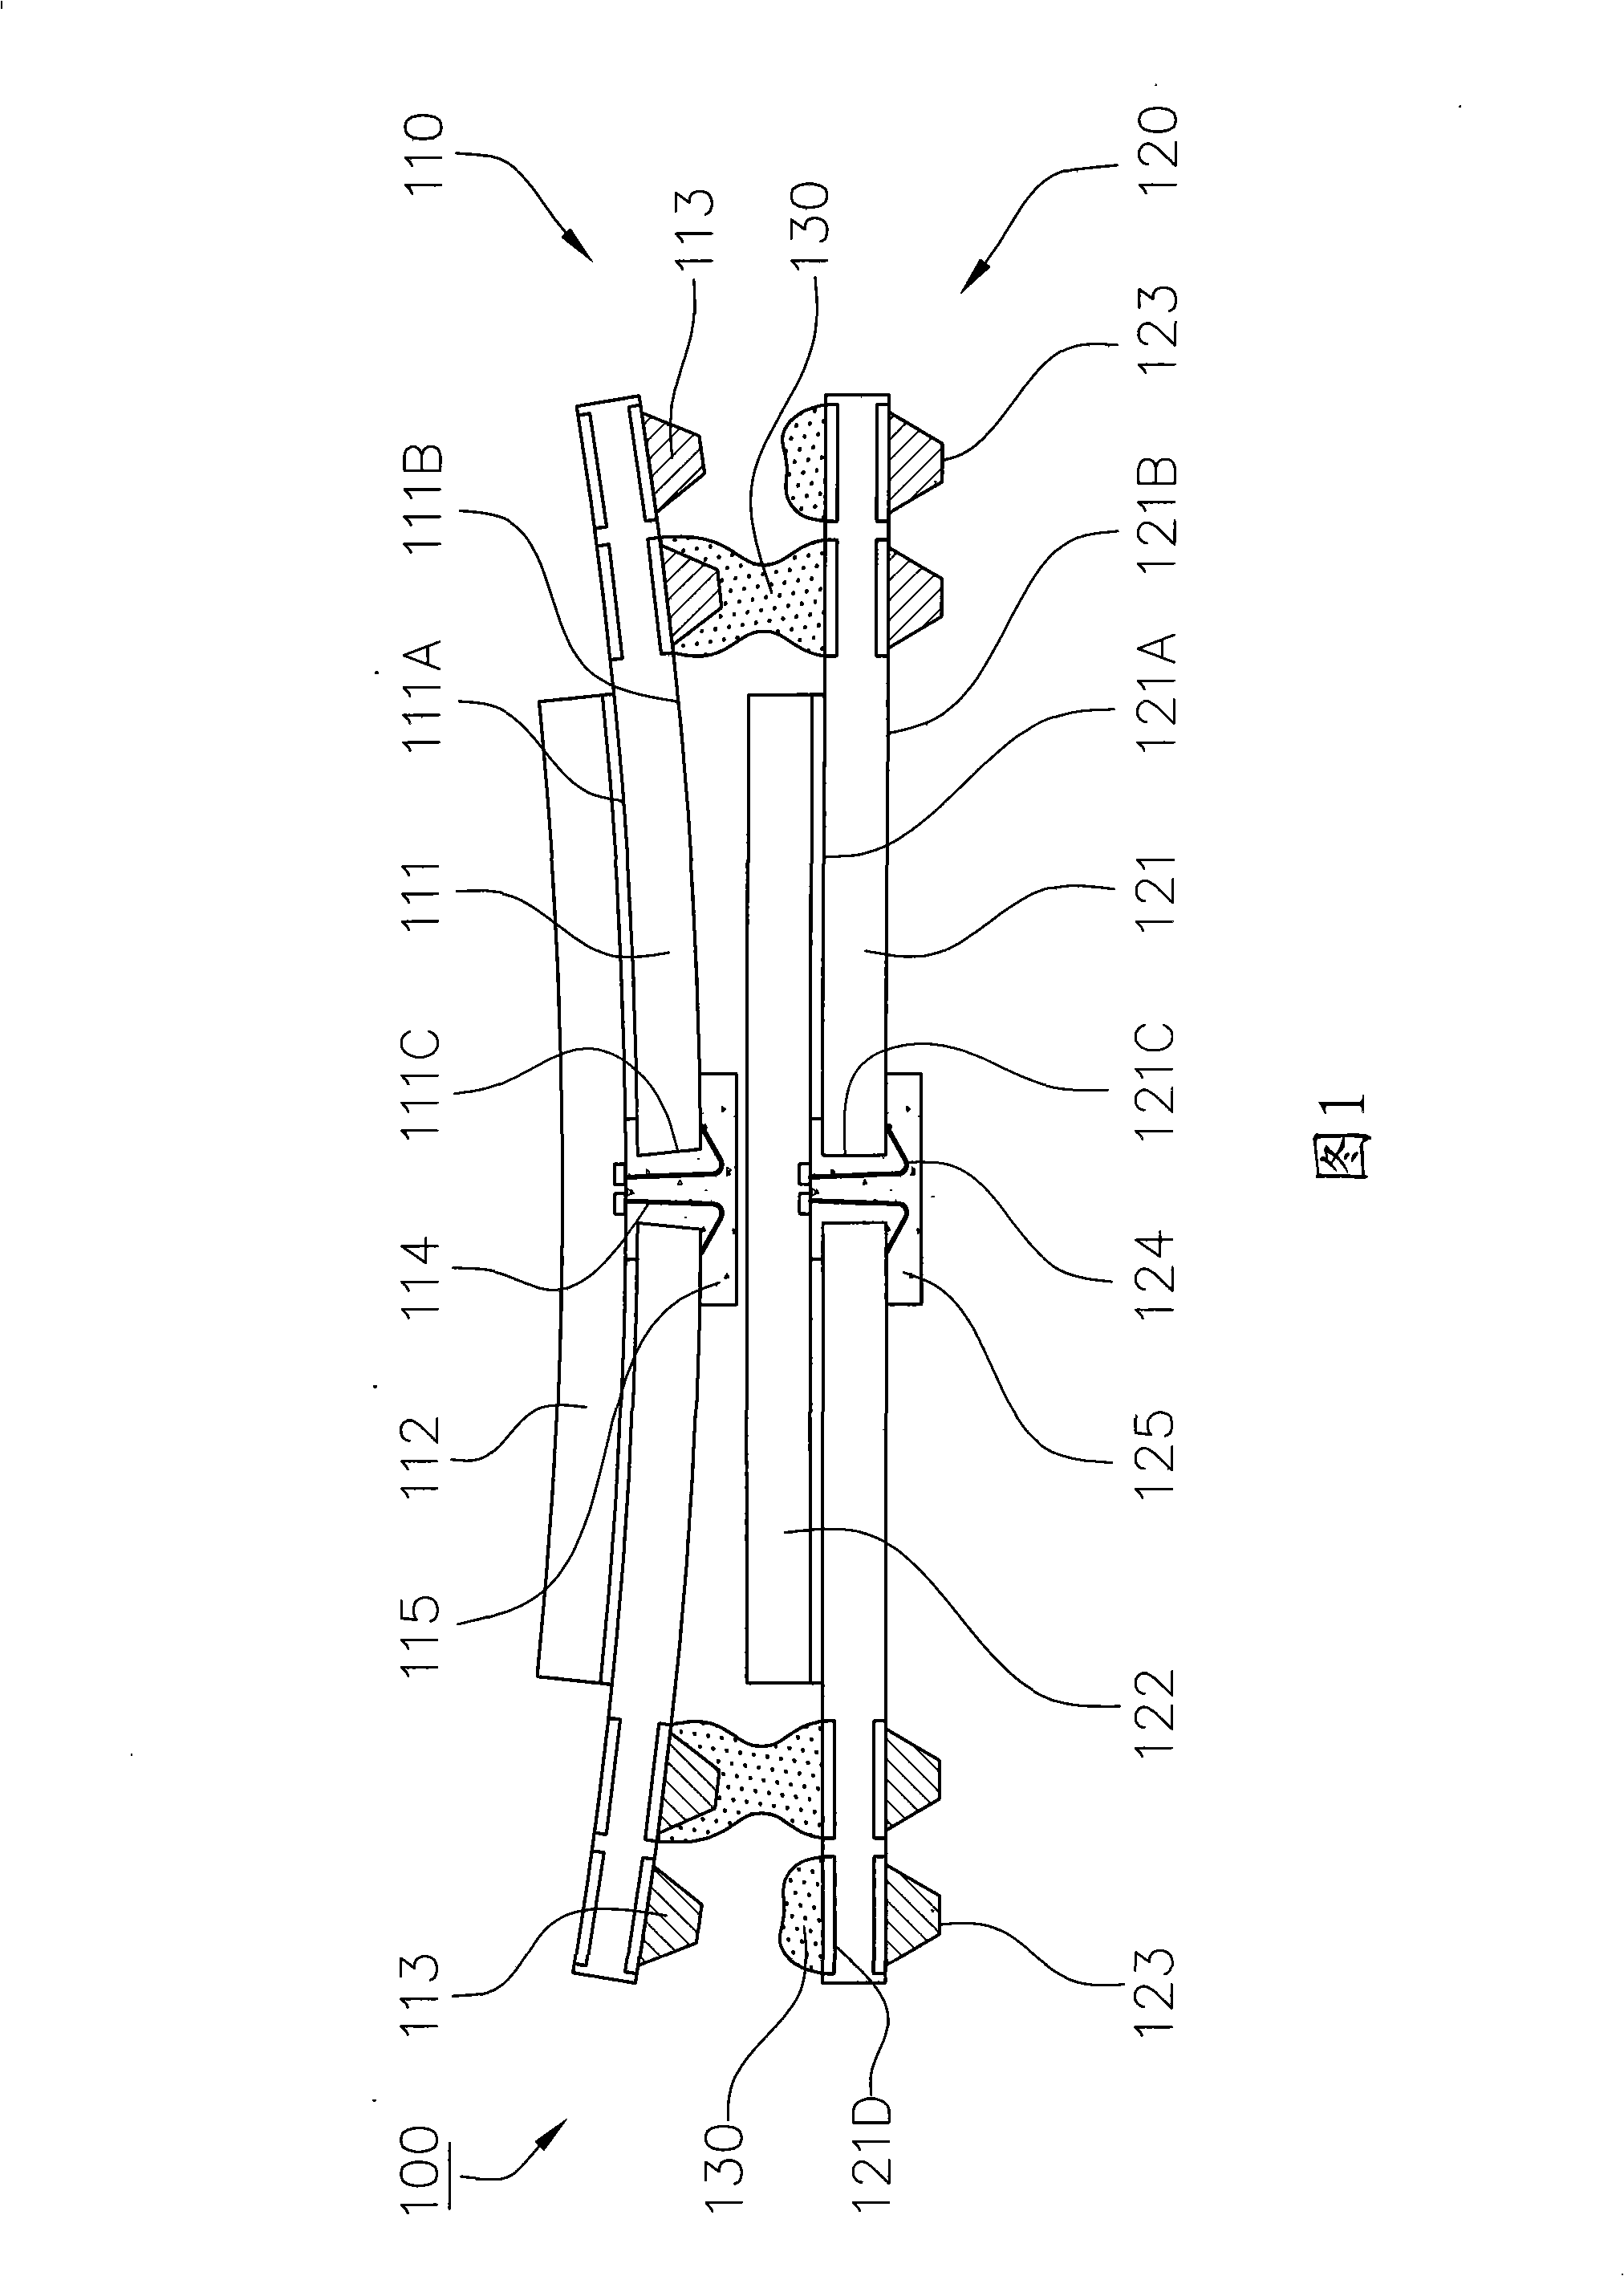 Semi-conductor encapsulation connecting construction avoiding welding defect induced by warp of substrate